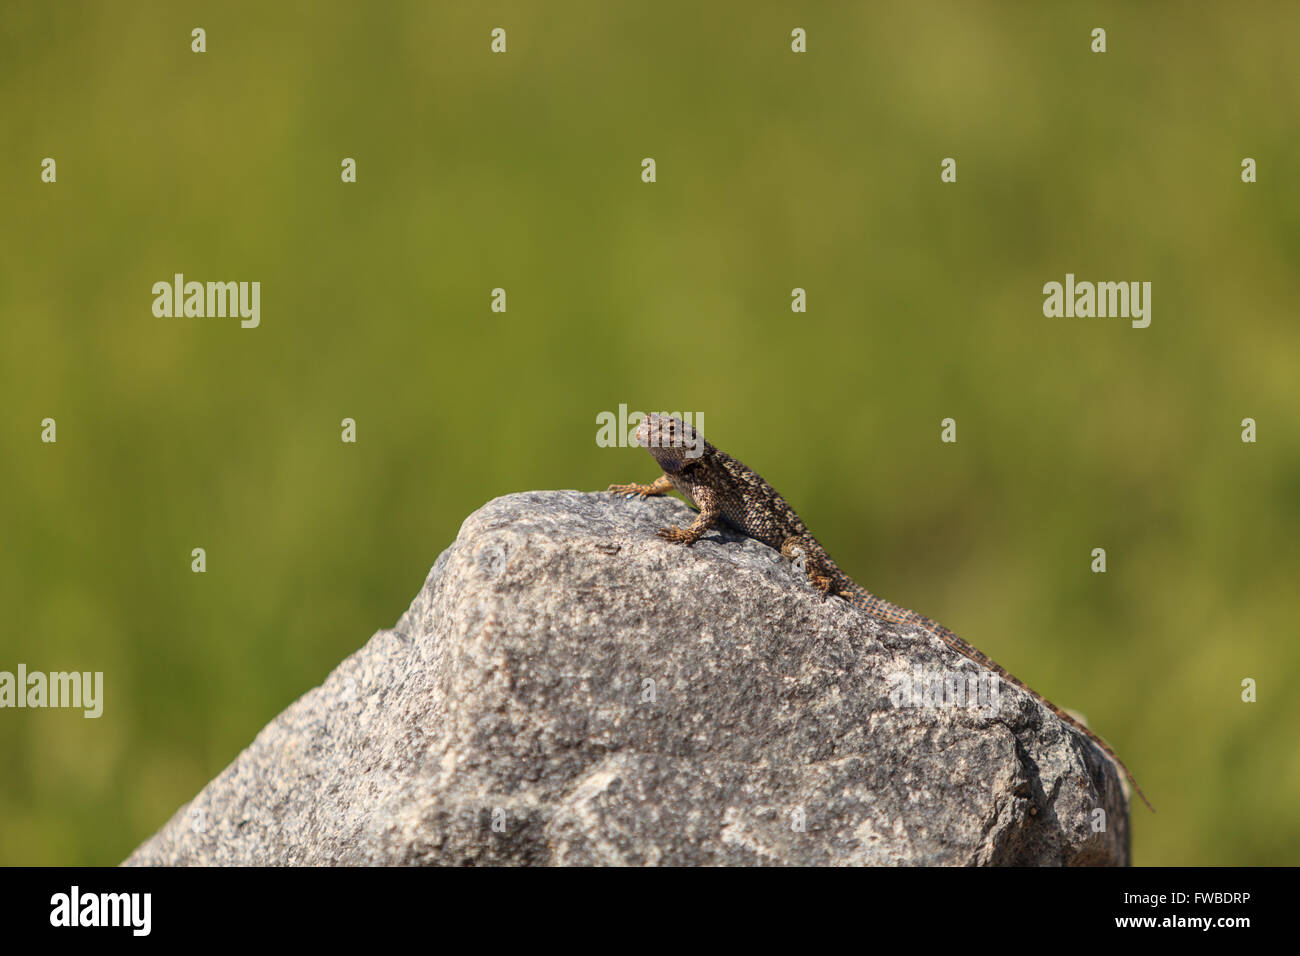 Brown common fence lizard, Sceloporus occidentalis, perches on a rock with a green background in Southern California. Stock Photo